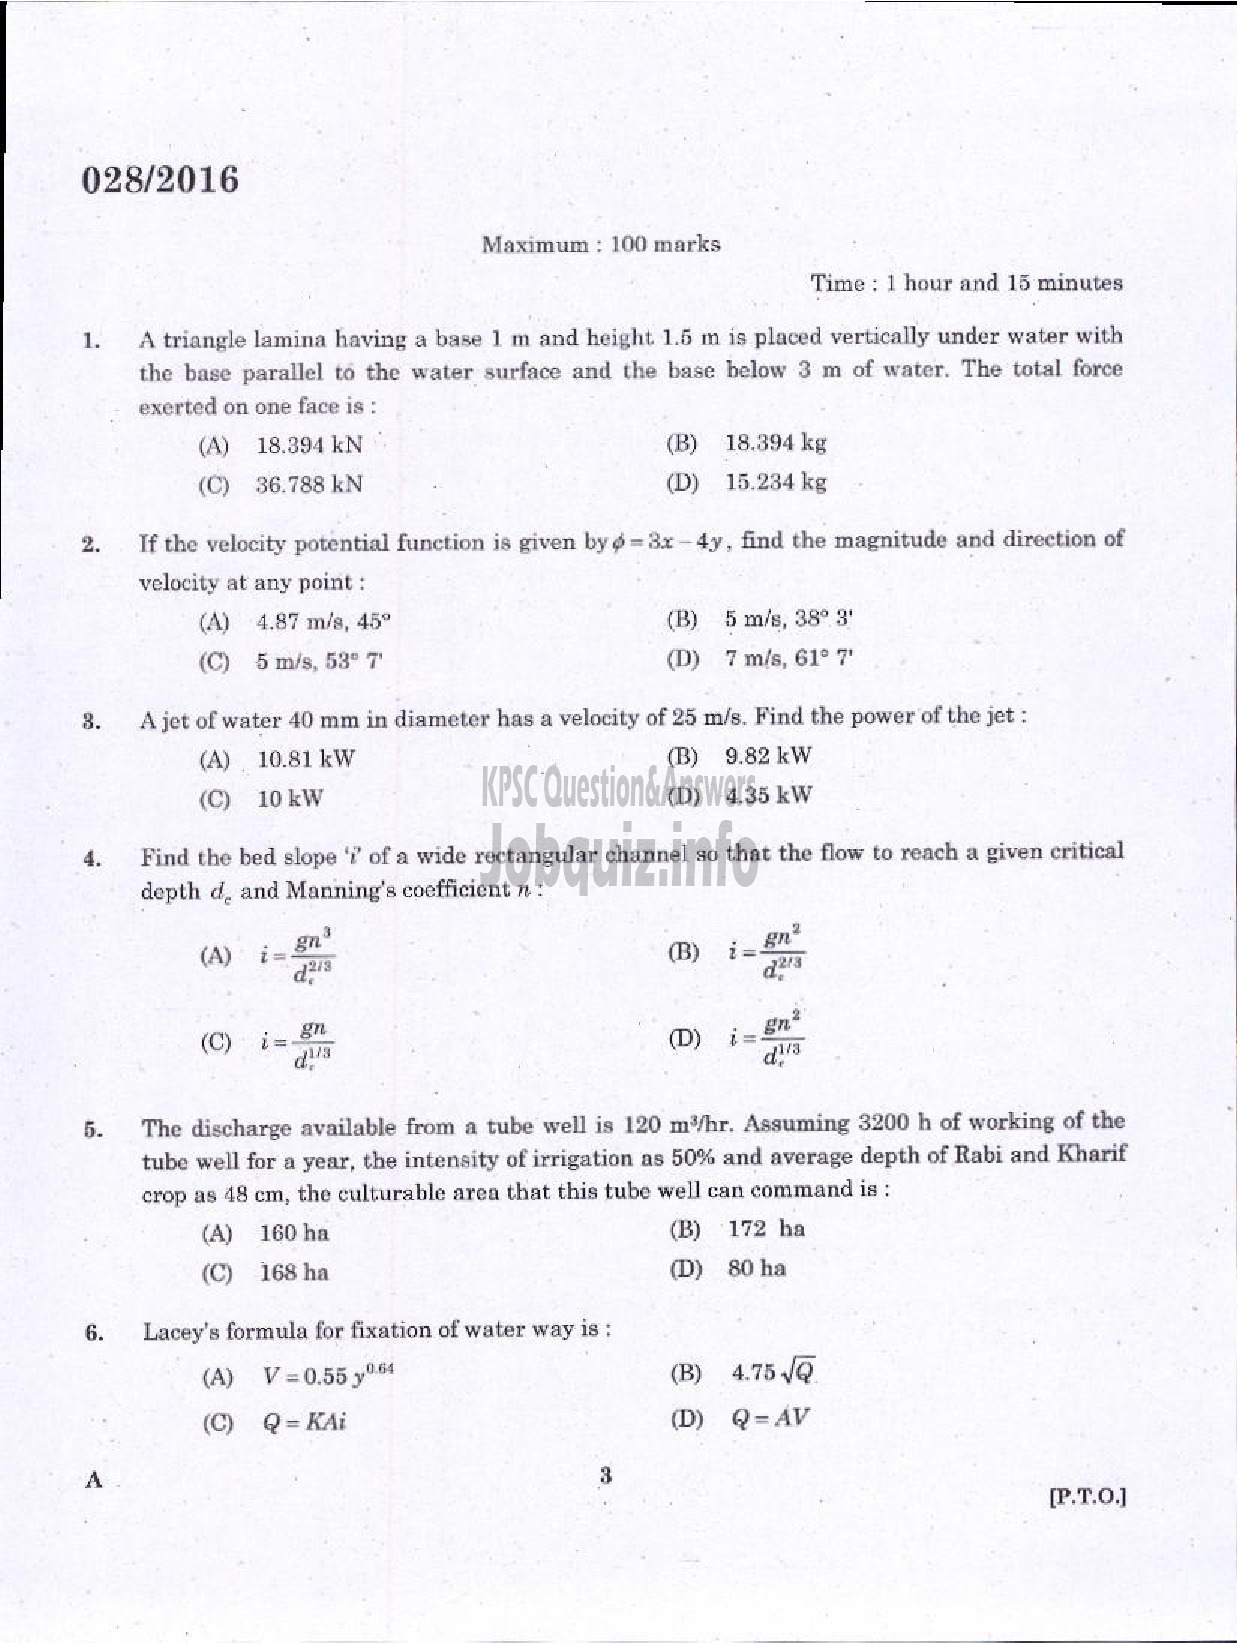 Kerala PSC Question Paper - ASSISTANT ENGINEER DIRECT/BY TRANSFER KERALA WATER AUTHORITY-1